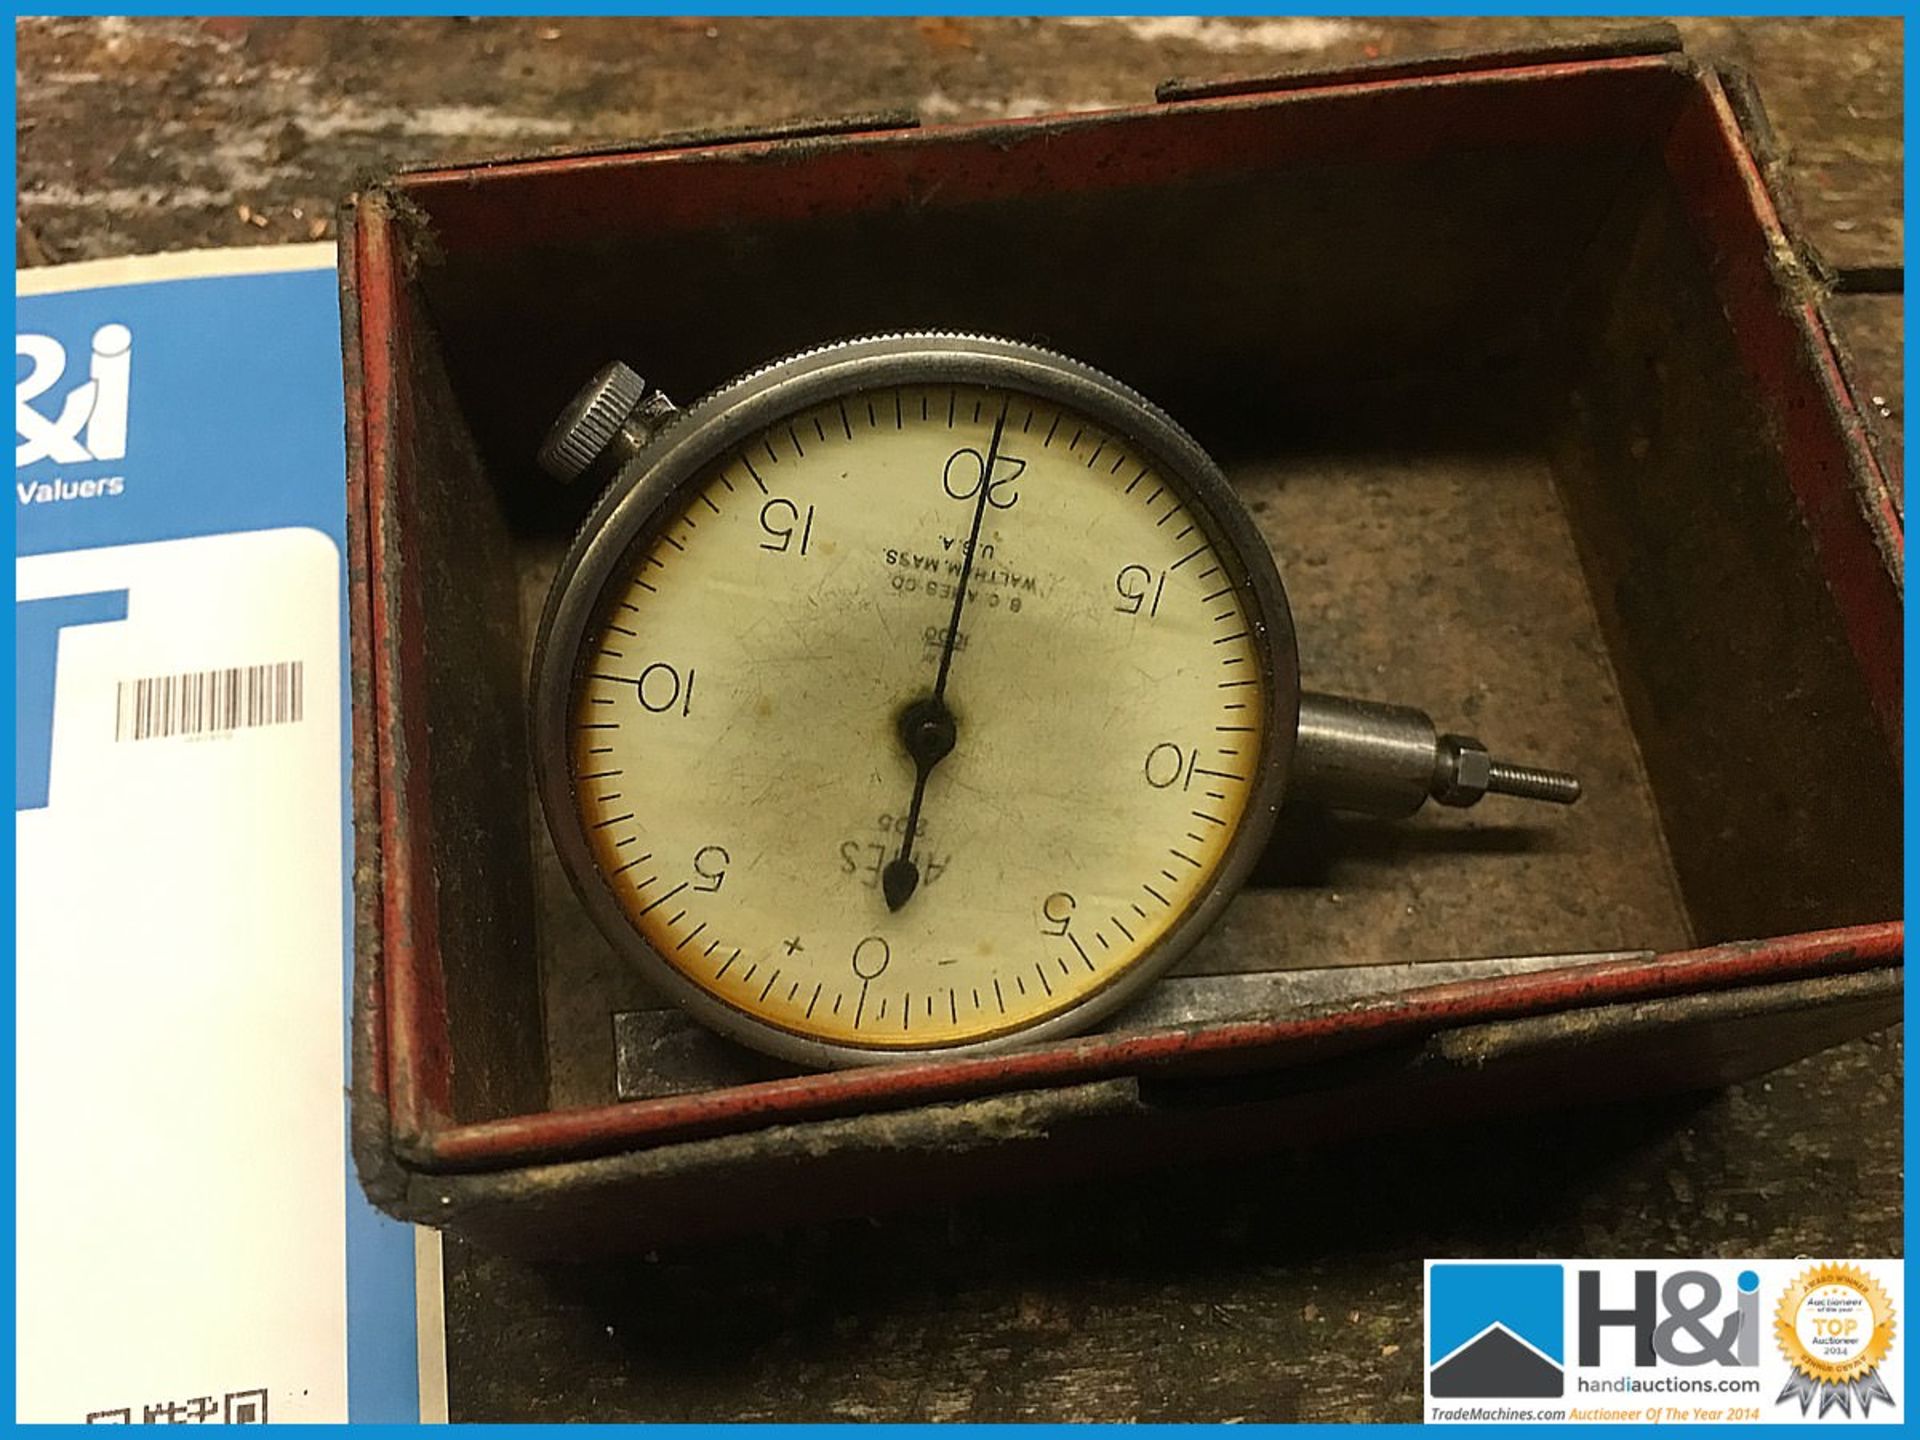 Vintage dial guauge in original box Appraisal: Viewing Essential Serial No: NA Location, Contact & - Image 2 of 3